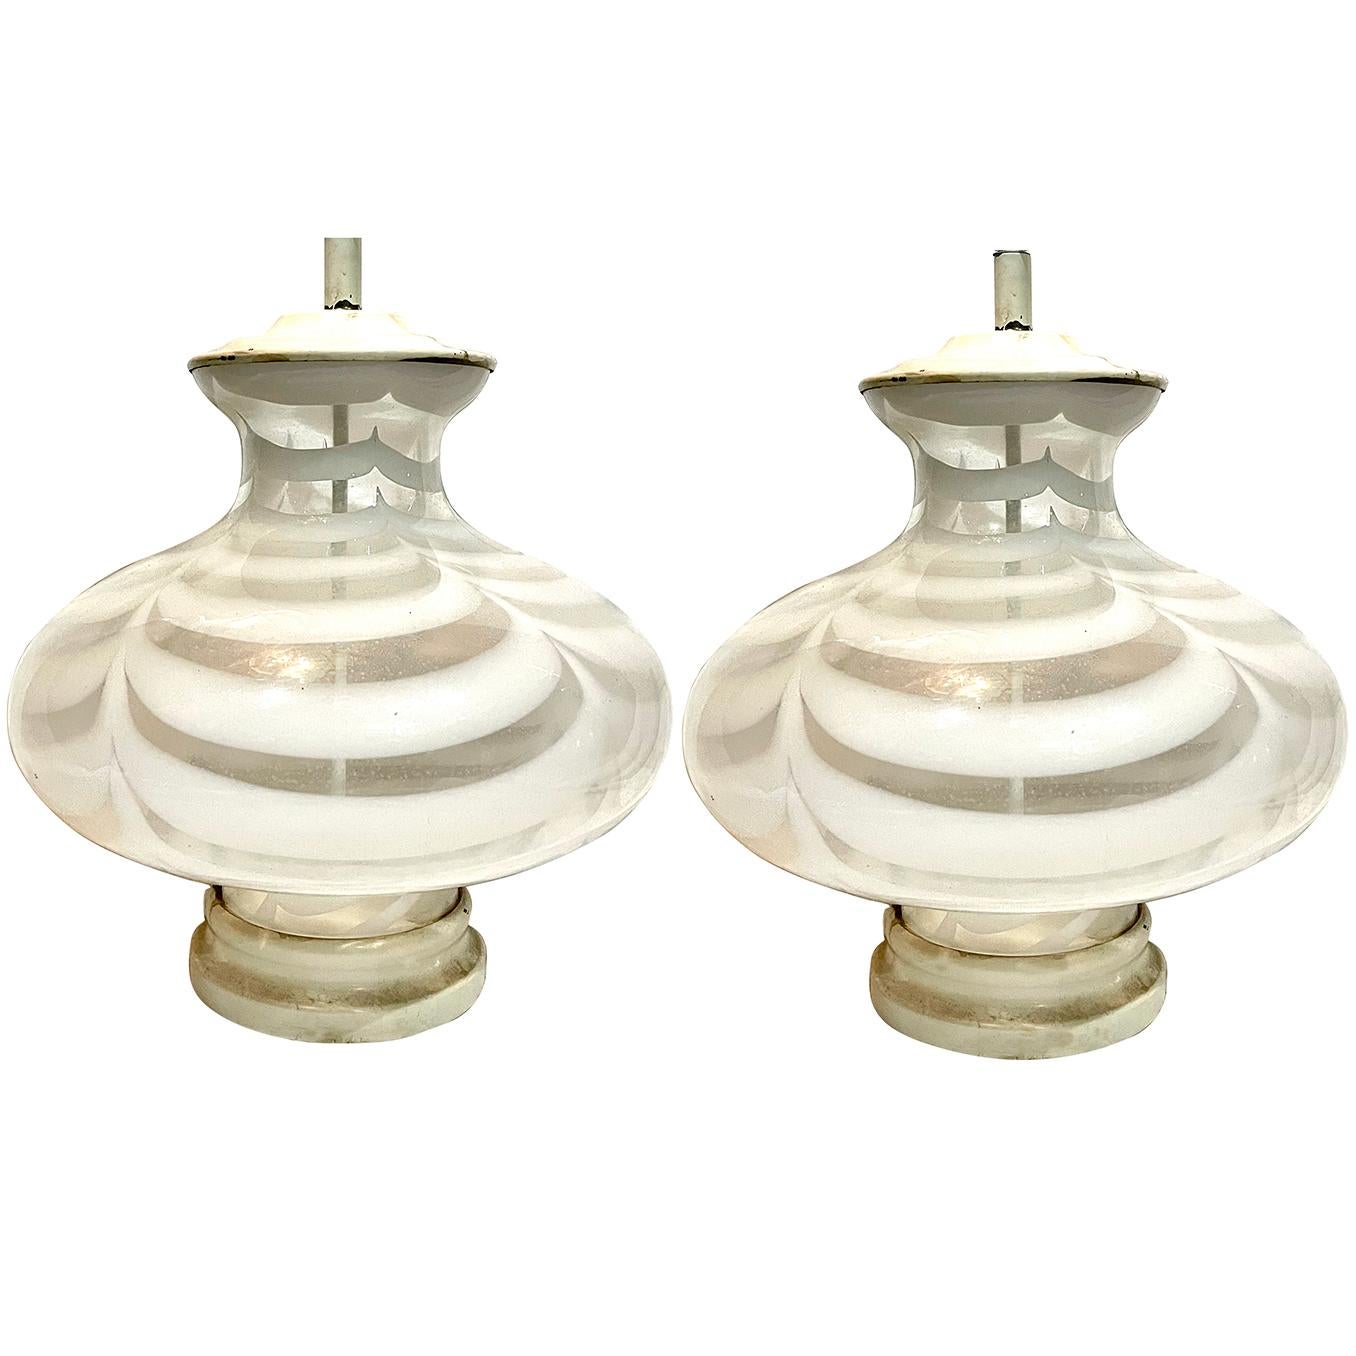 A pair of circa 1960's Italian Moderne style blown ribbon glass table lamps in white and clear.

Measurements:
Height of body: 16